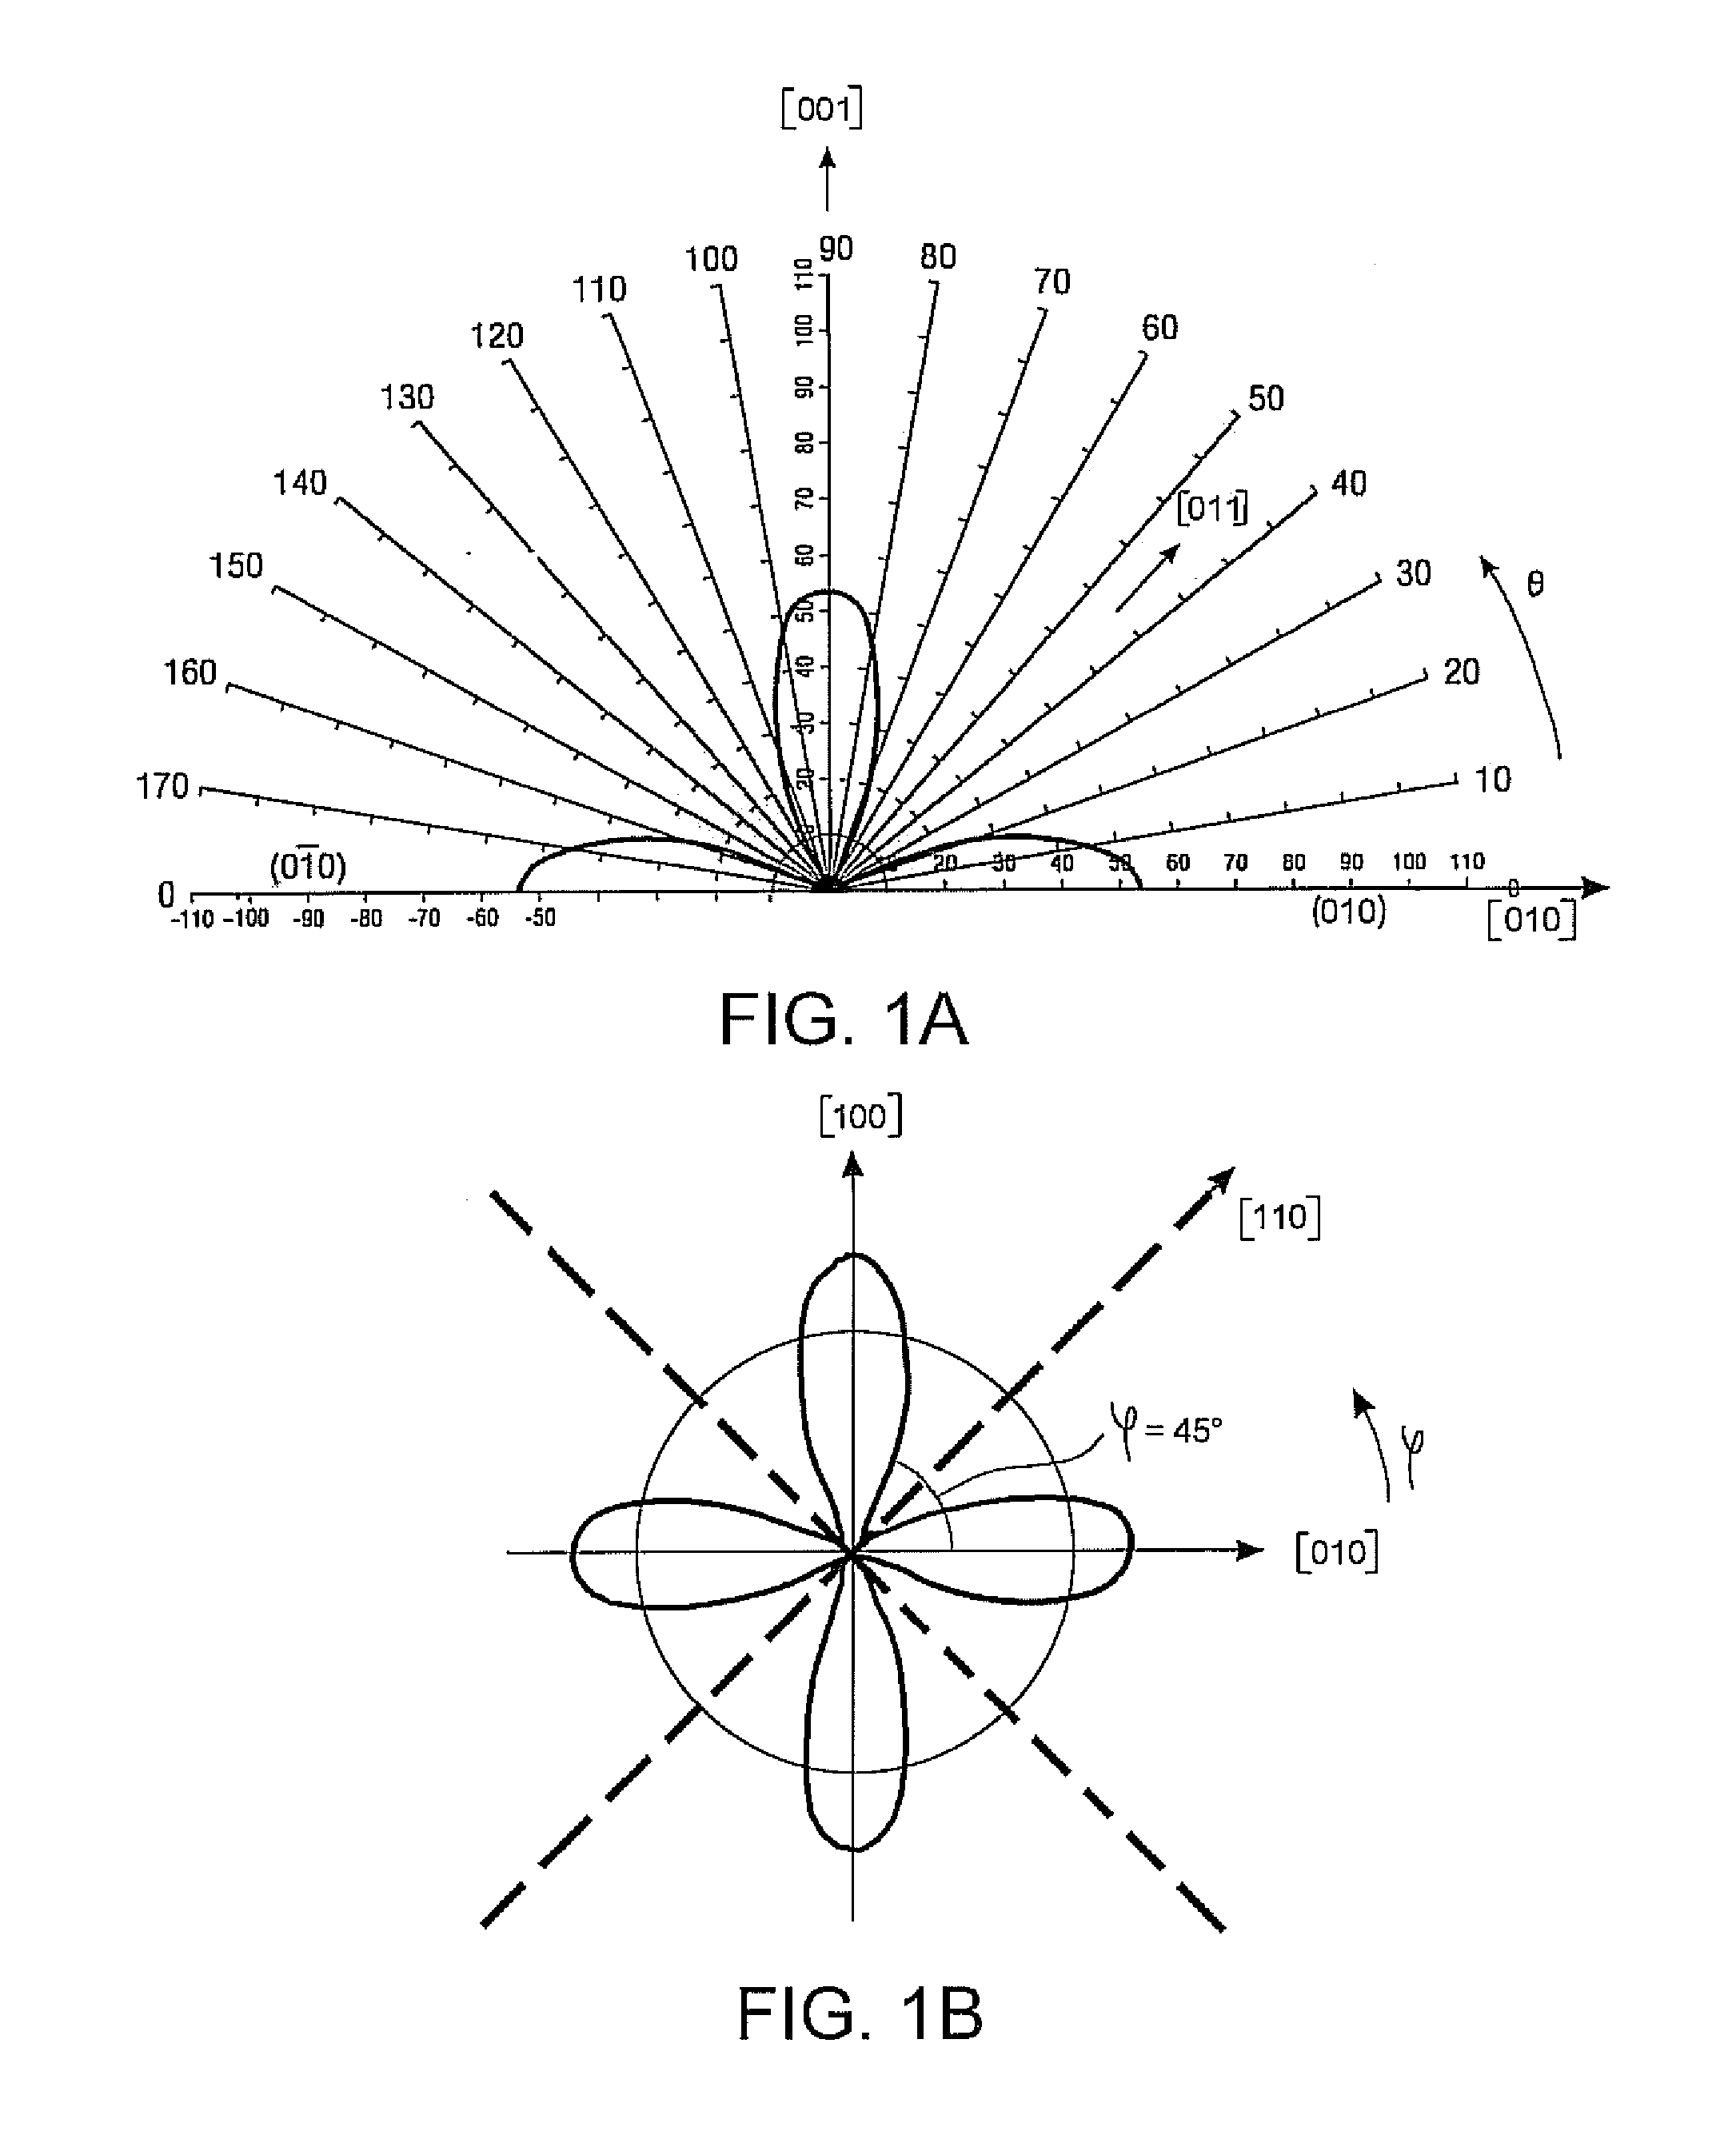 Integrated electronic device for monitoring mechanical stress within a solid structure